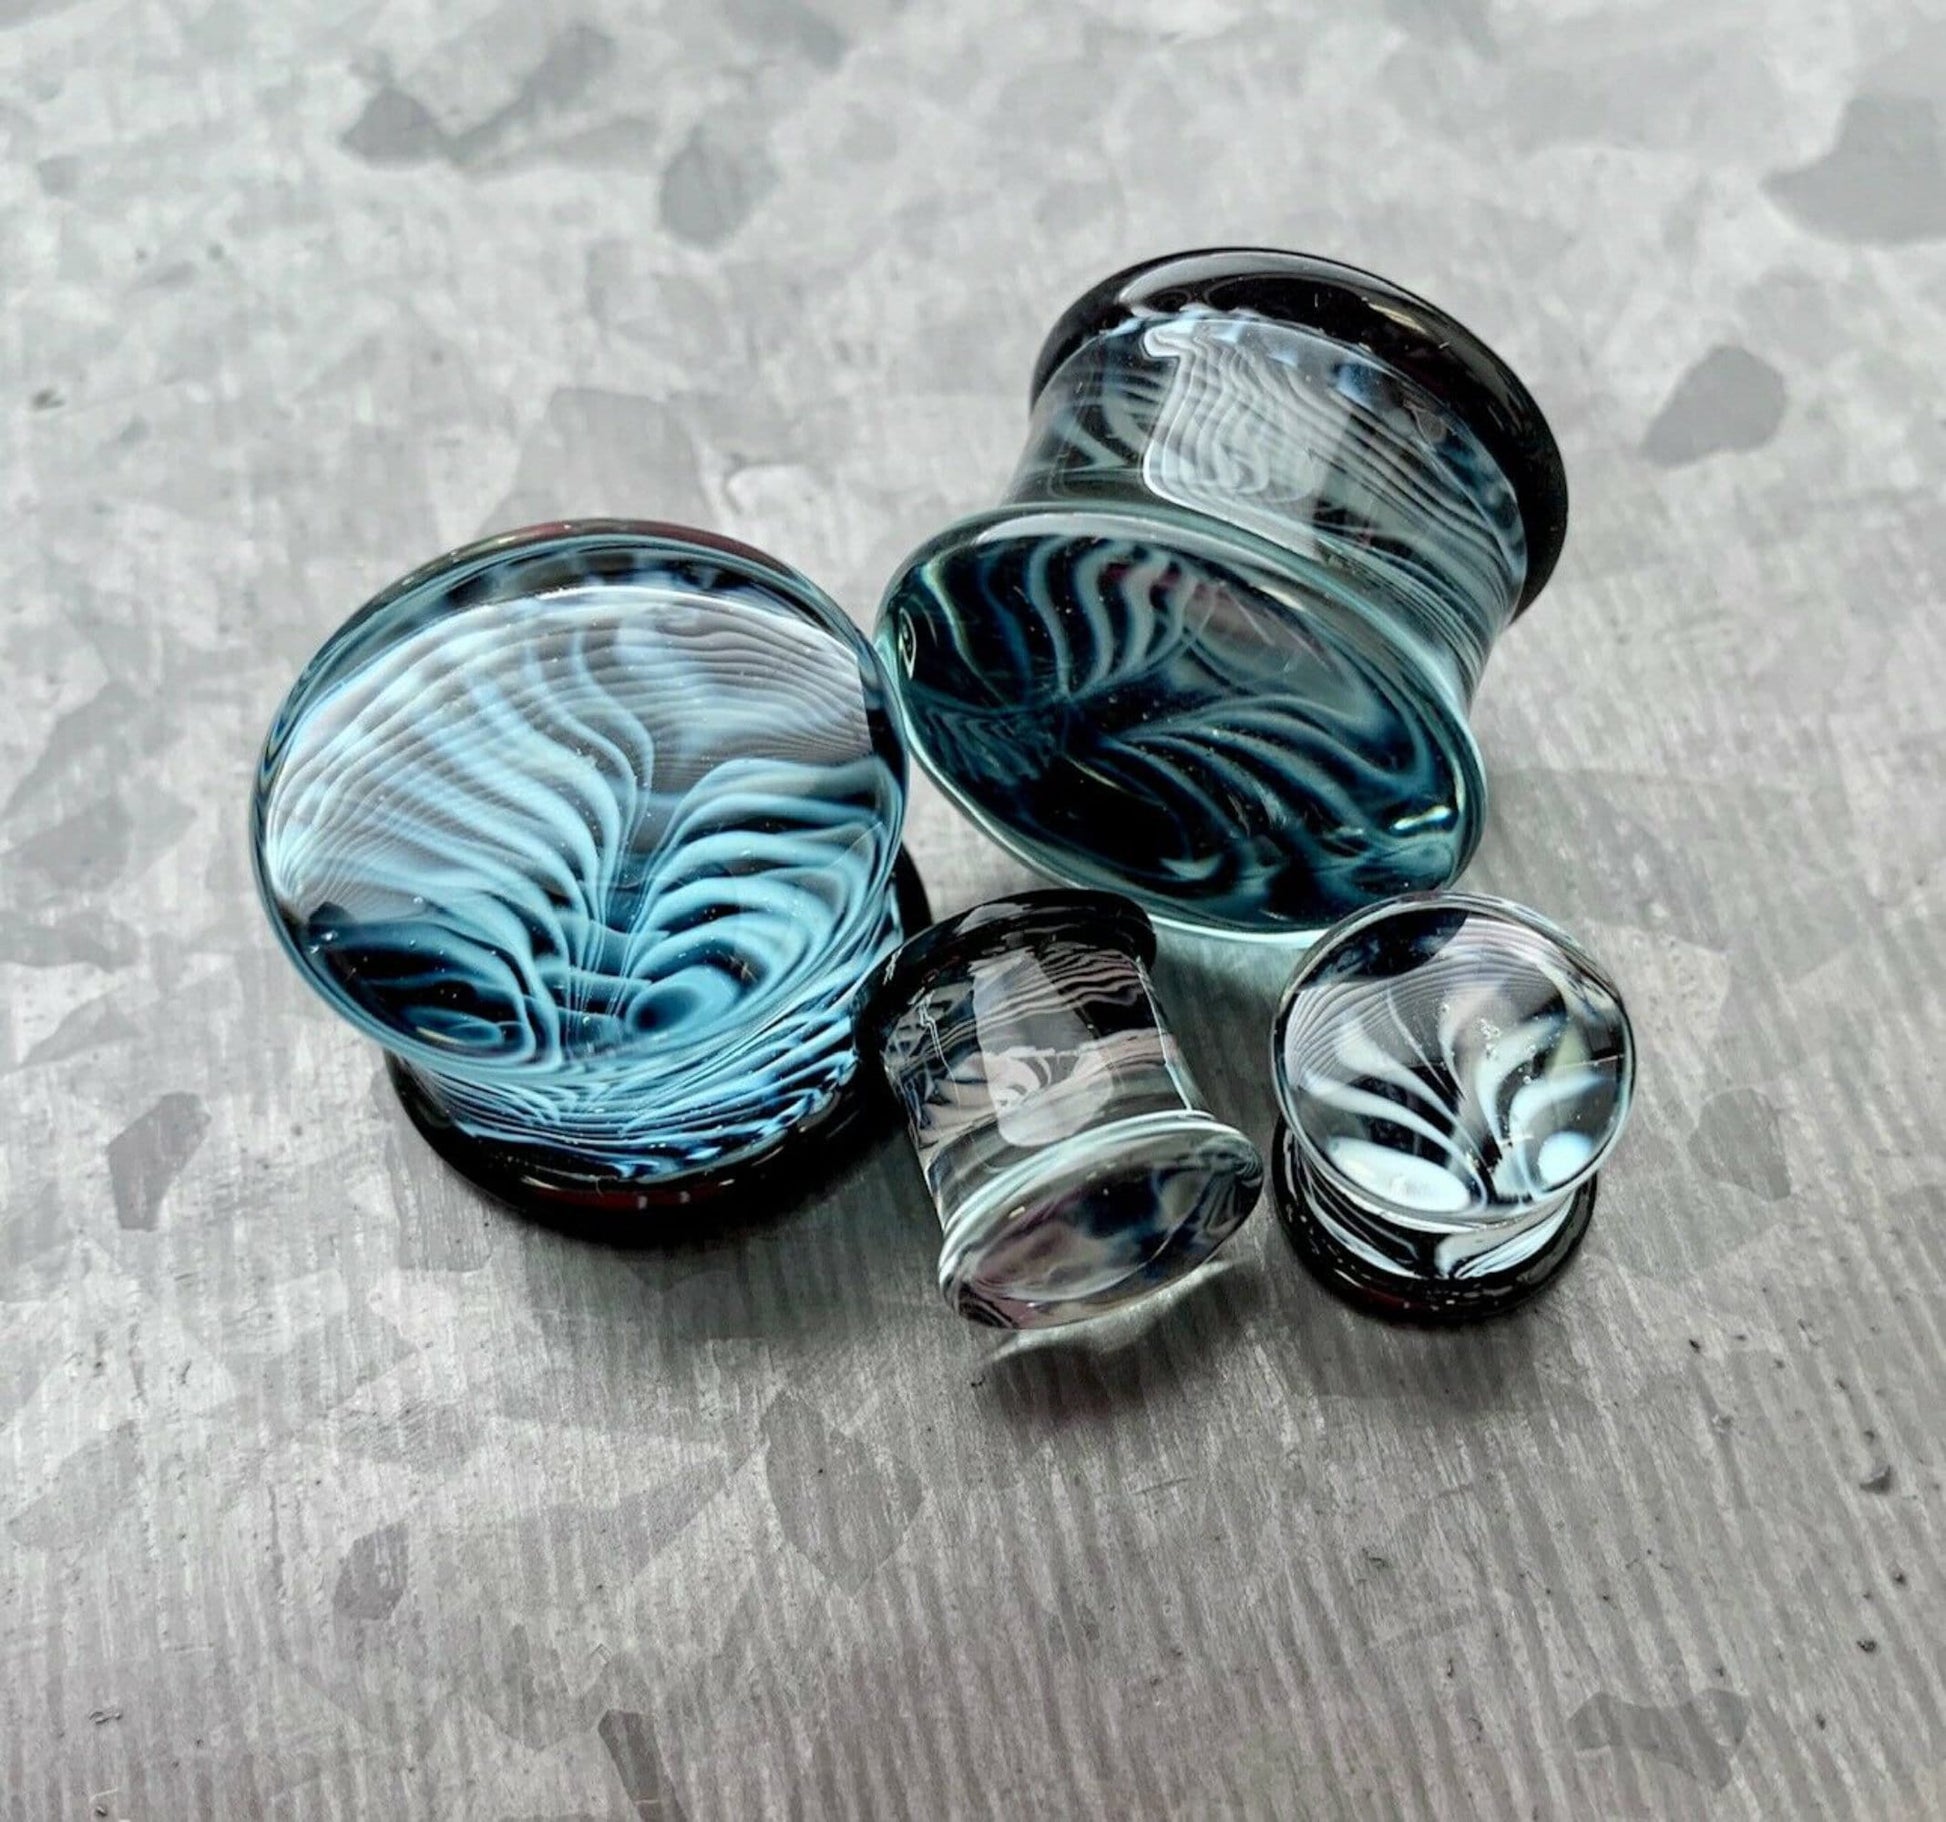 PAIR of Unique Black & White Design Pyrex Glass Double Flare Plugs - Gauges 2g (6mm) through 3/4" (19mm) available!19mm) available!